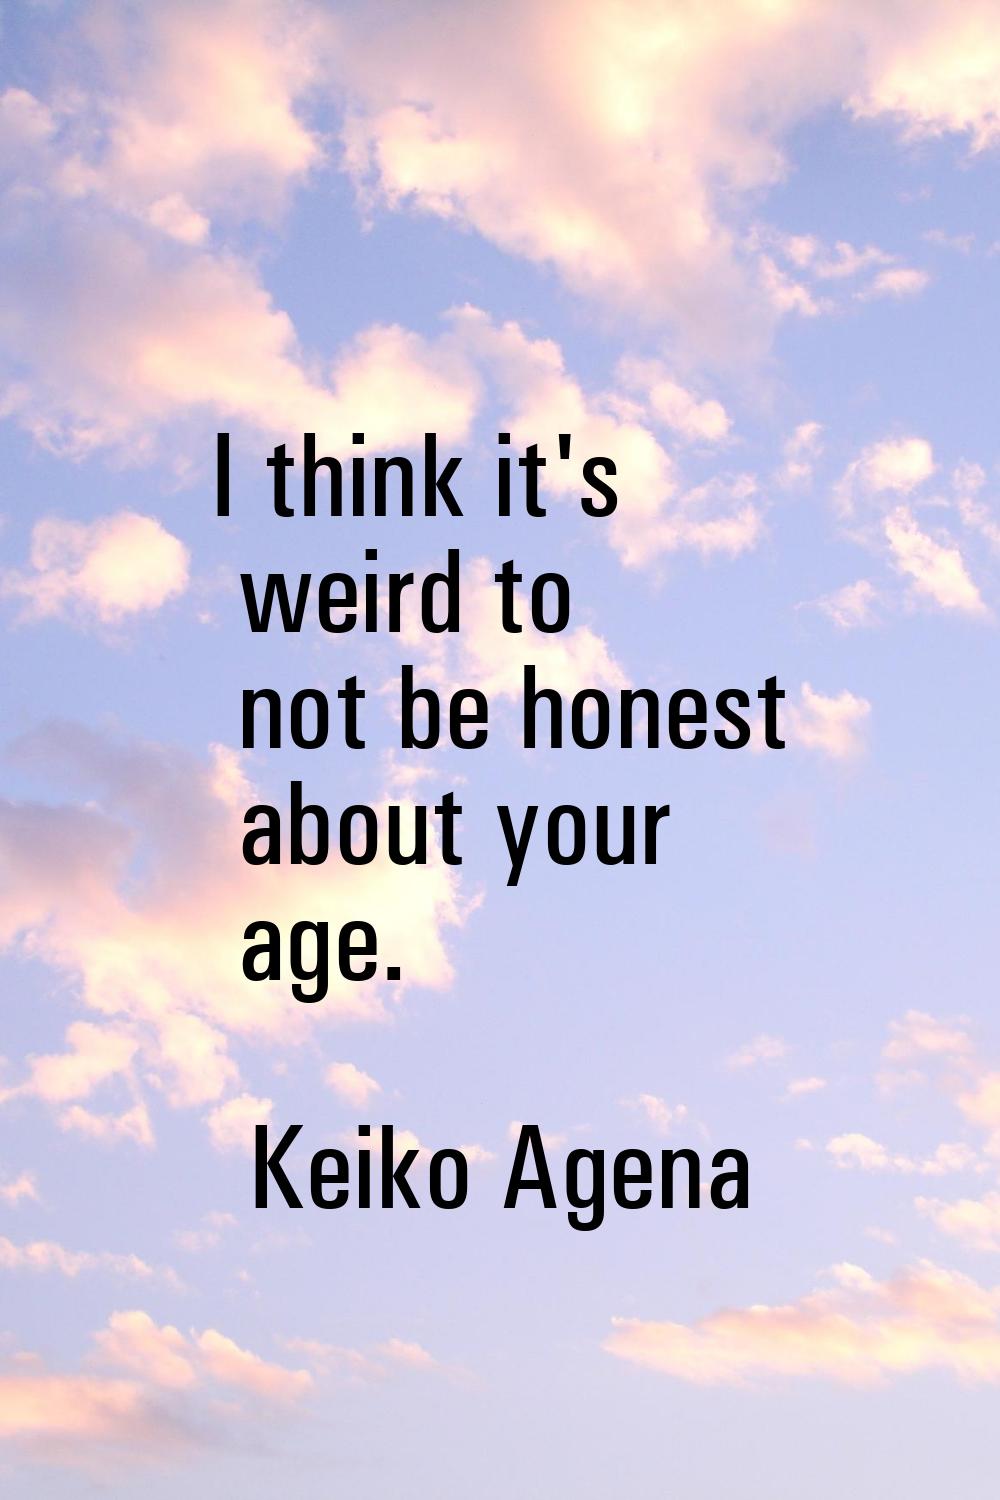 I think it's weird to not be honest about your age.